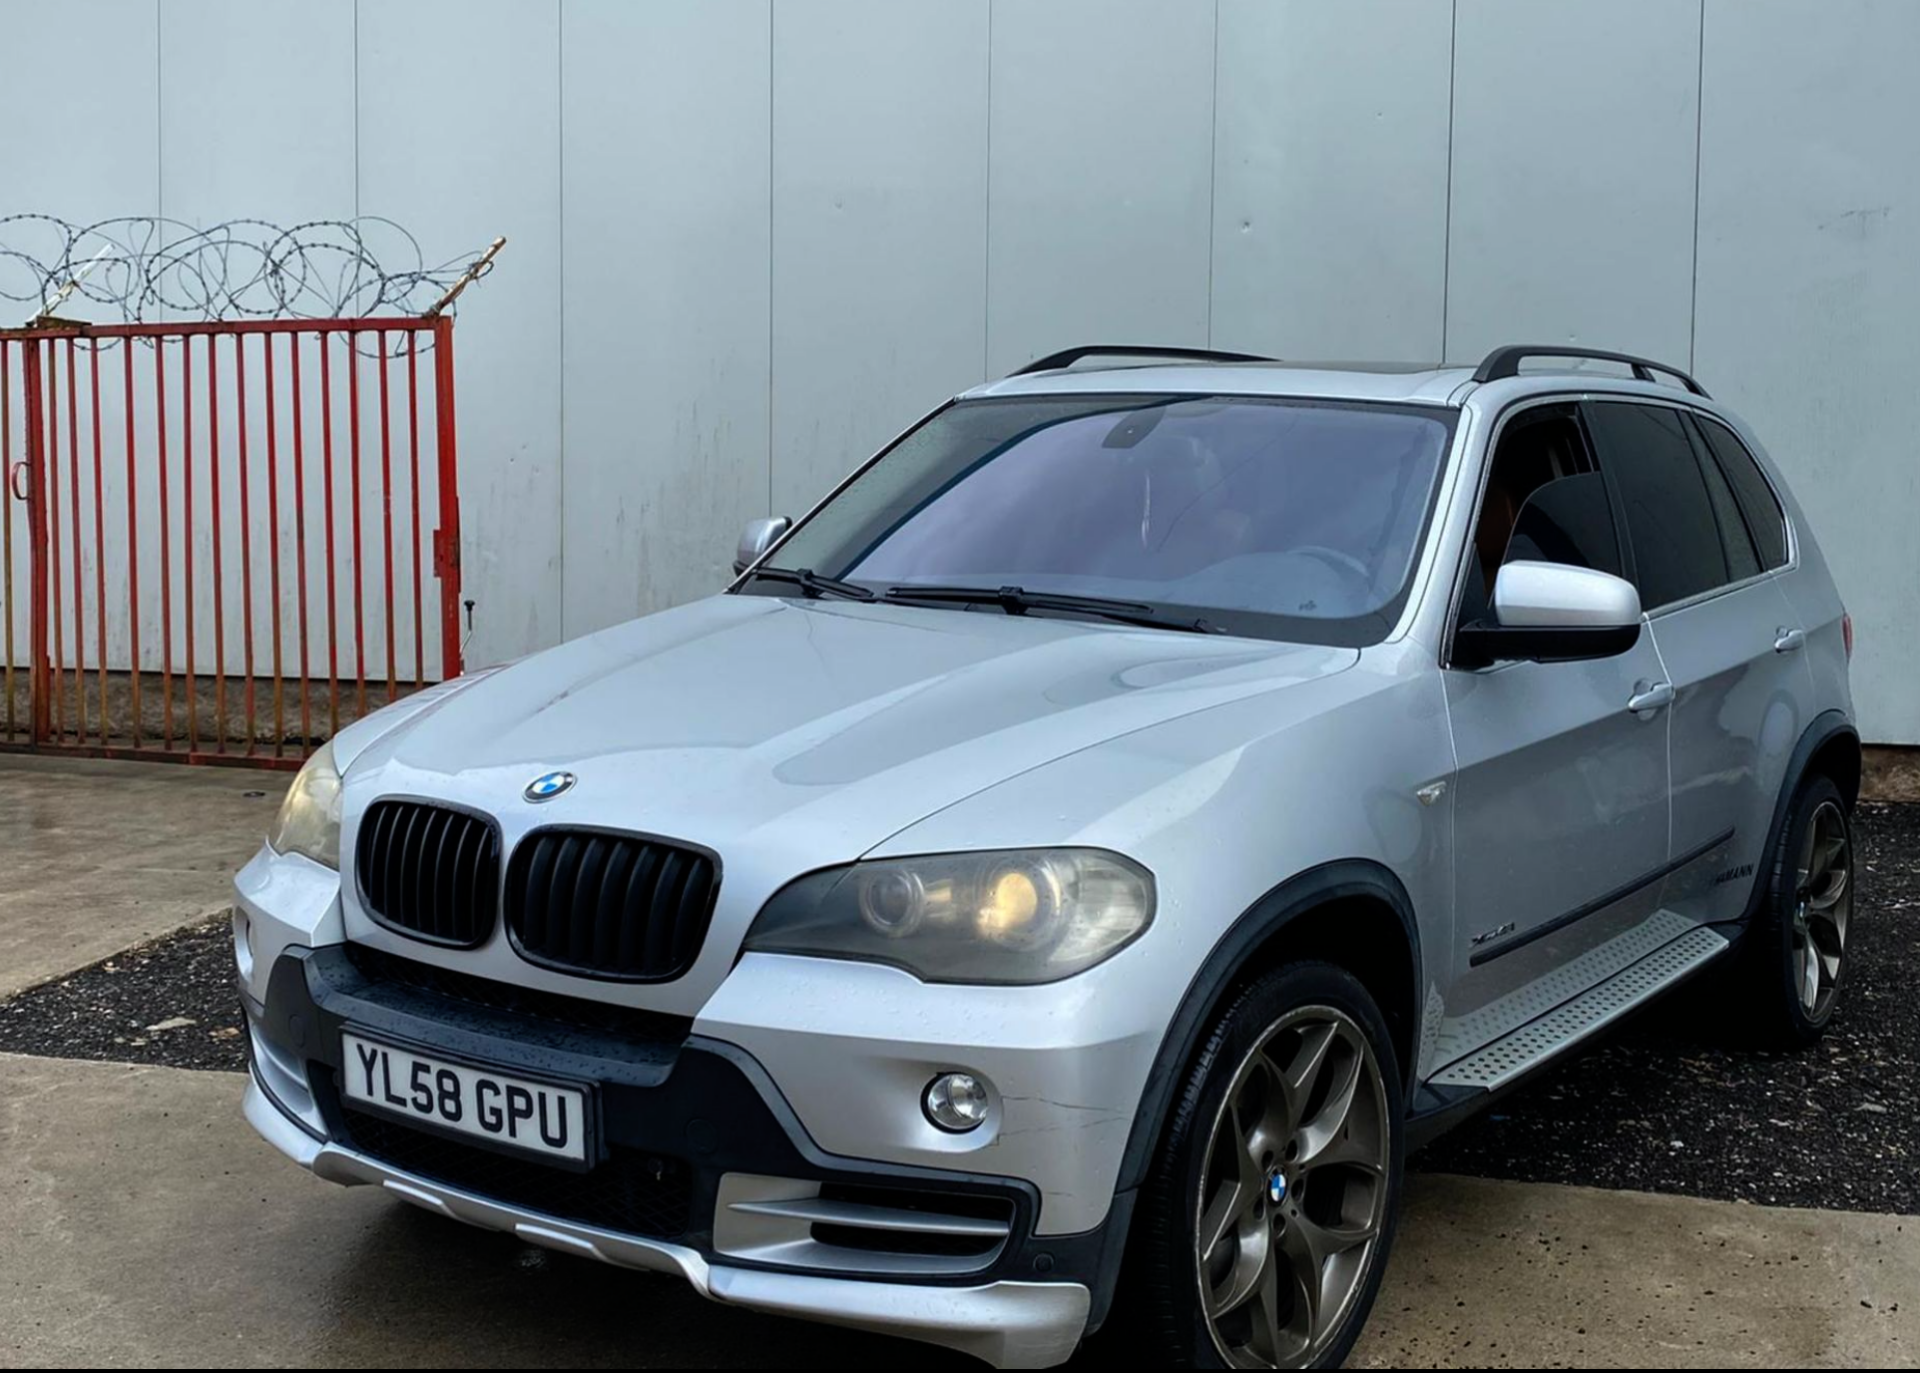 2009/58 REG BMW X5 4.8L PETROL AUTOMATIC SILVER, SHOWING 1 FORMER KEEPER - LEFT HAND DRIVE *NO VAT* - Image 3 of 13